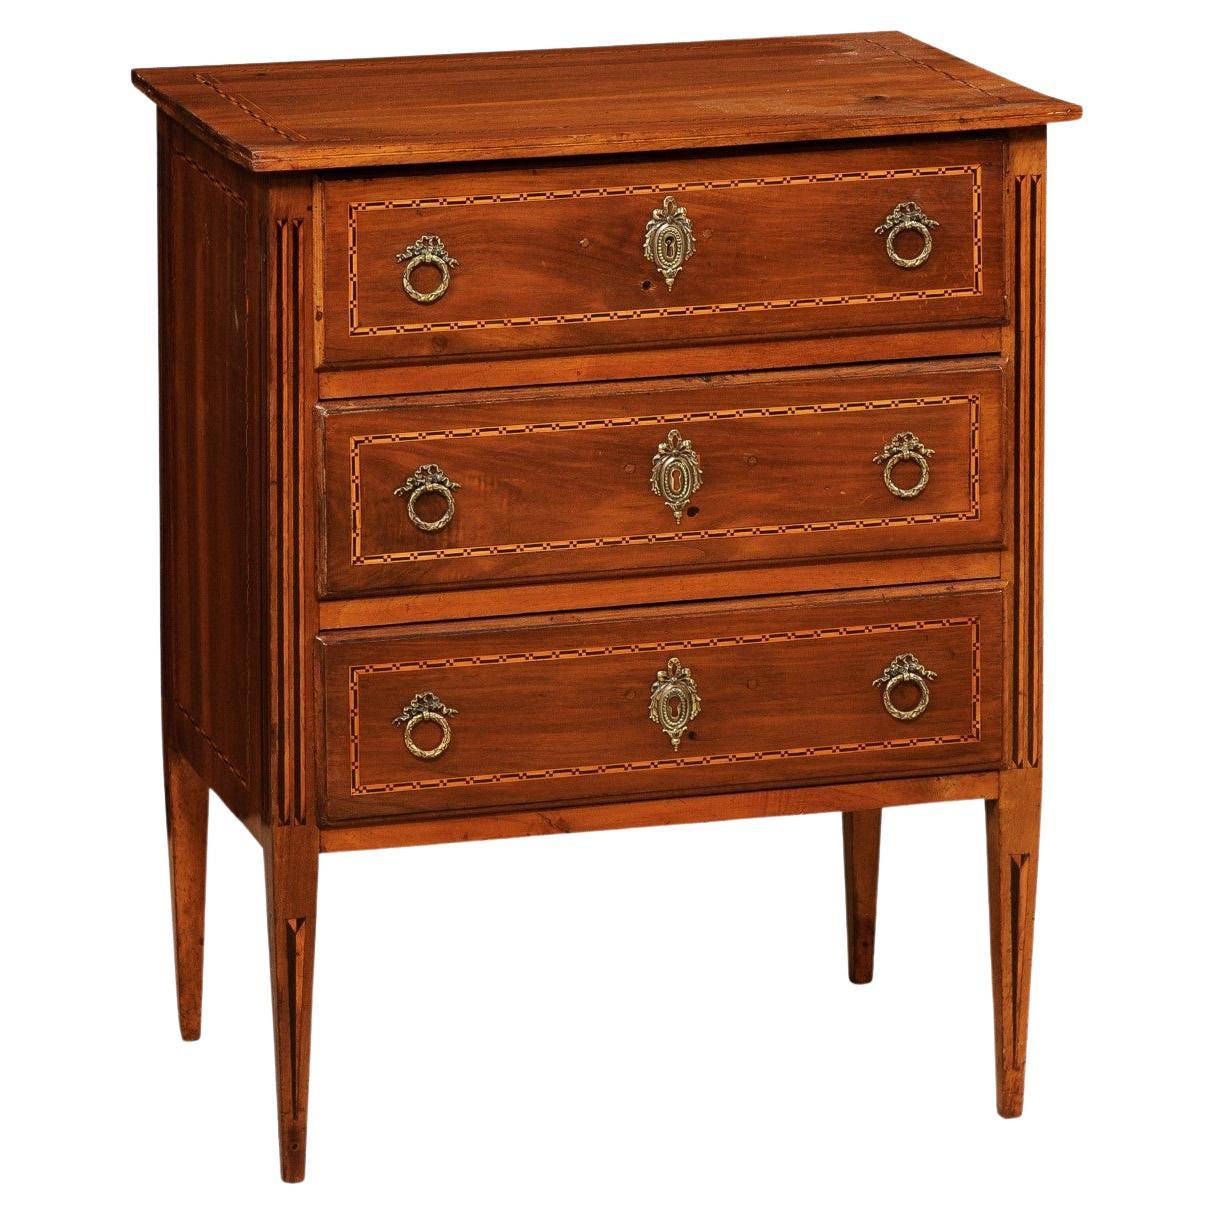 Italian Neoclassic-Style Raised Side Chest, Adorn w/Delicate Inlay Accents For Sale